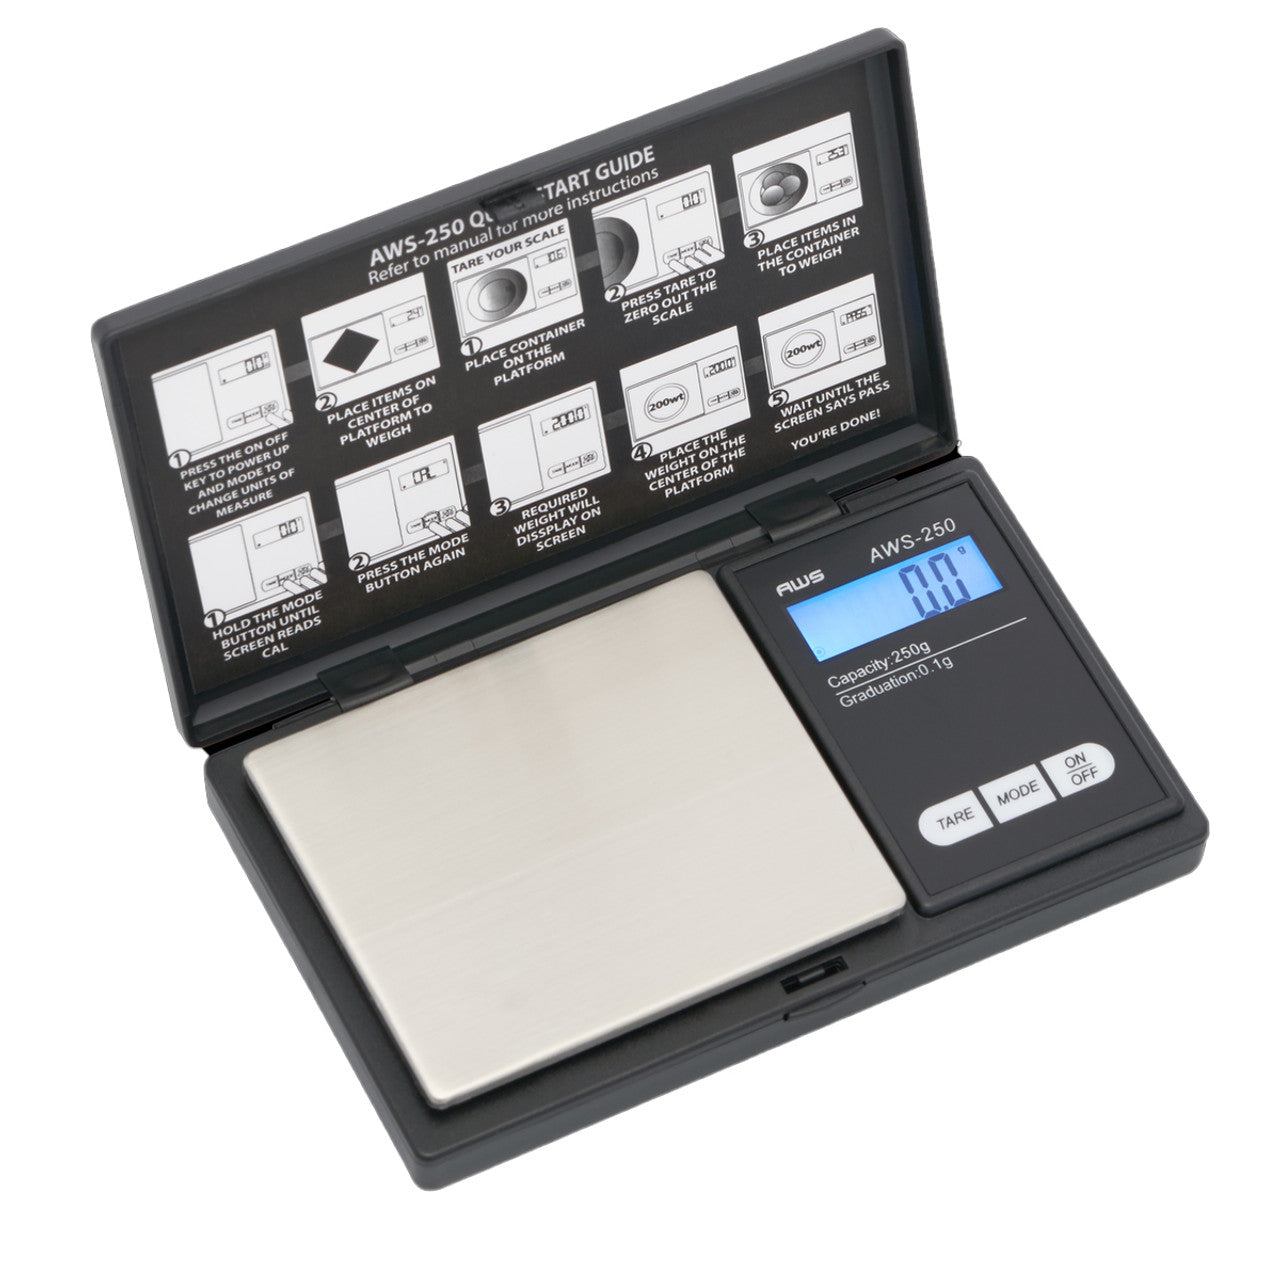 American Weigh Scales - AWS-250 Gram Precision Scale